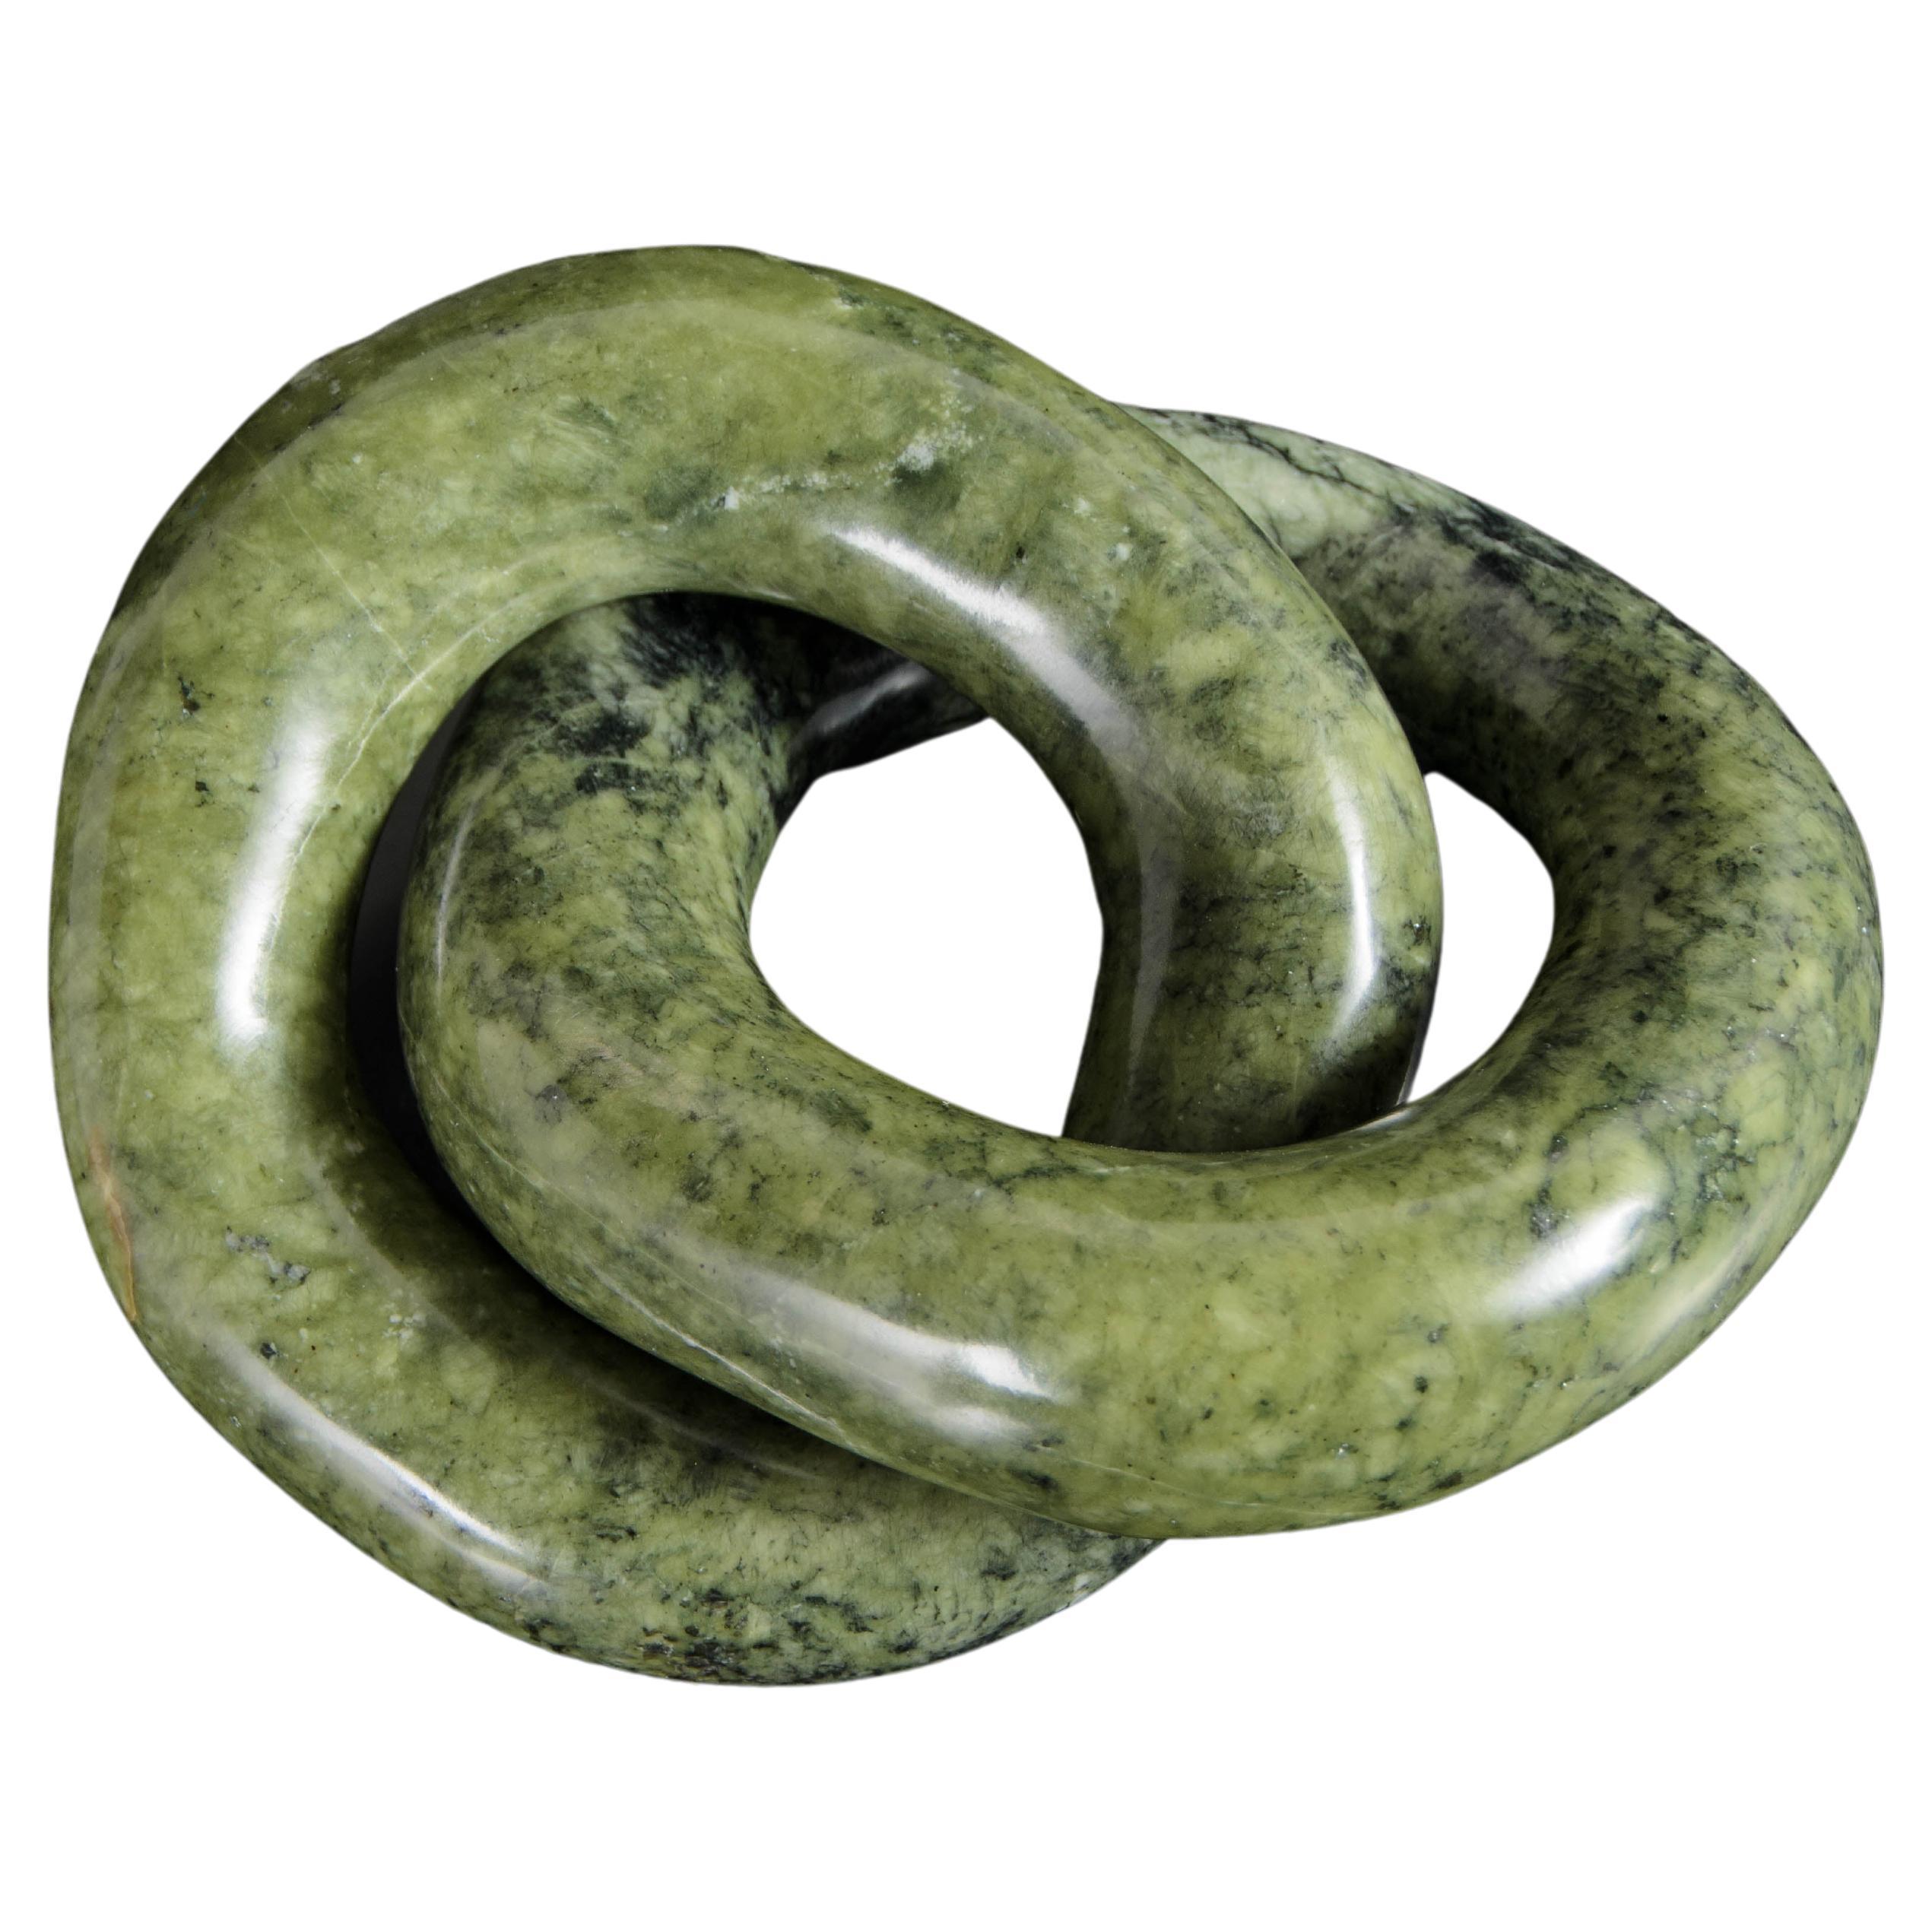 Contemporary Nephrite Jade Double Ring Link Sculpture by Robert Kuo For Sale